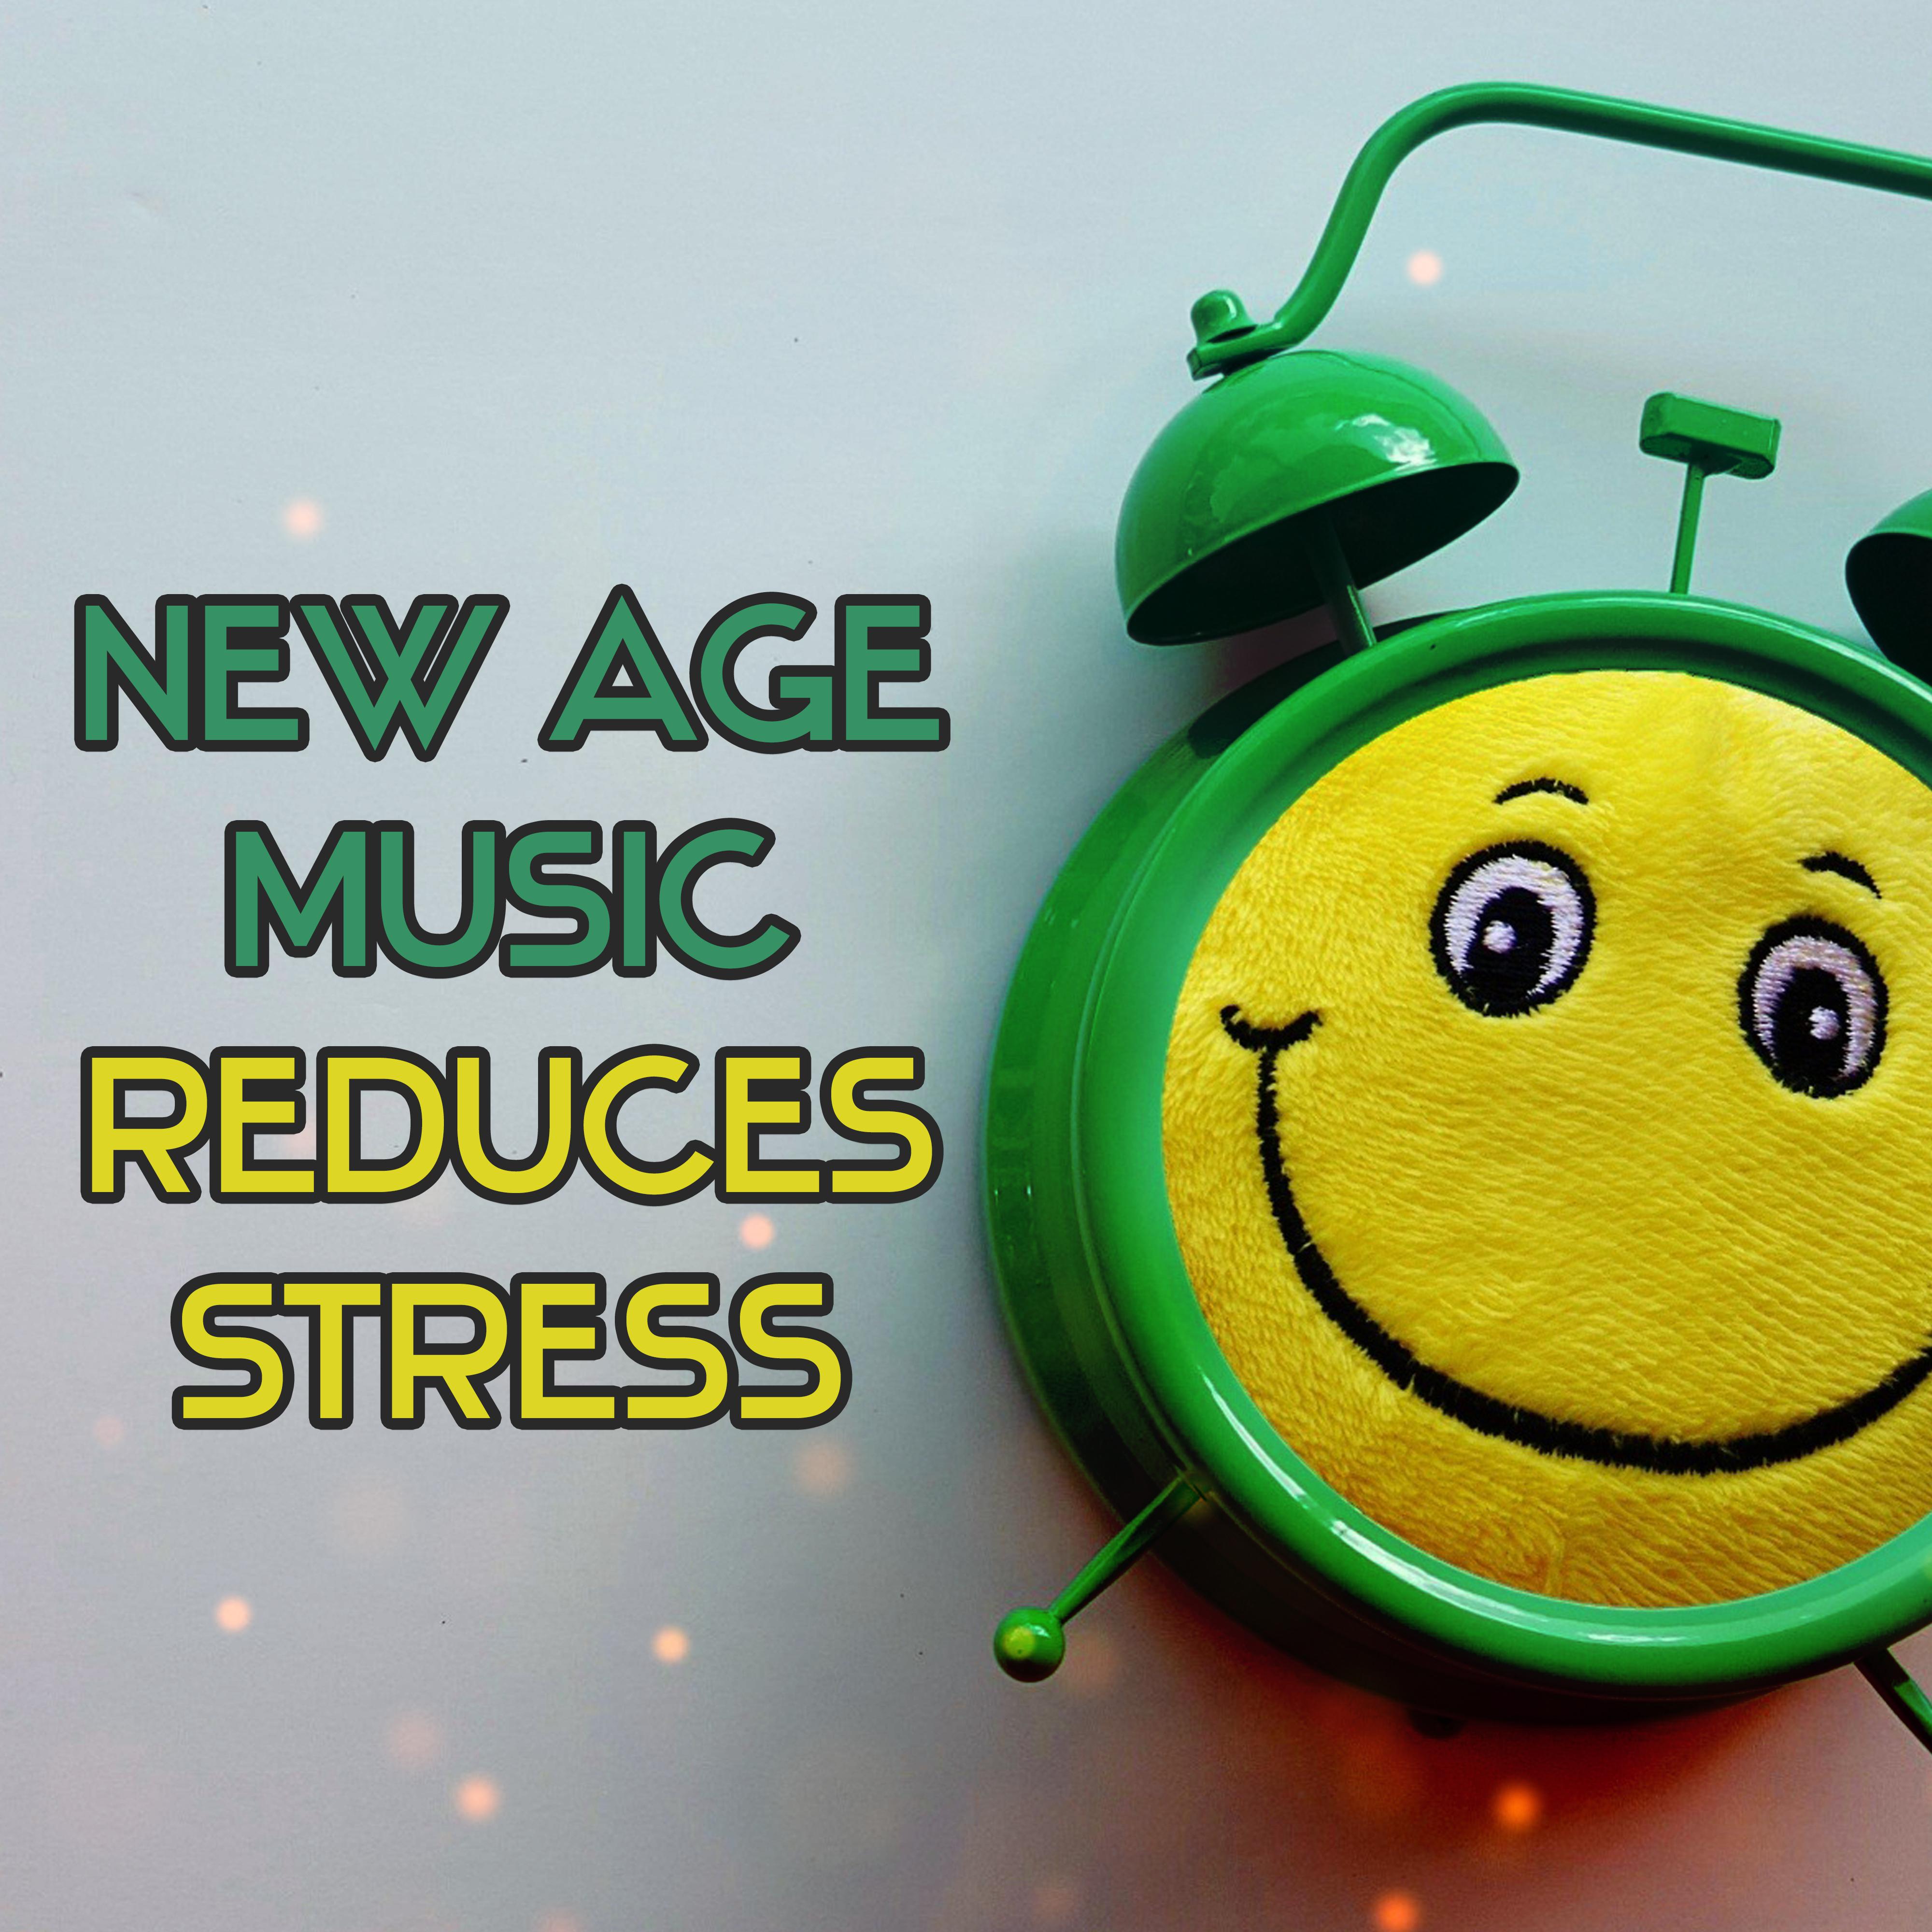 New Age Music Reduces Stress  Inner Calmness, Healing Music to Calm Down, Deep Sleep, Ambient Music, Relaxation Sounds to Rest